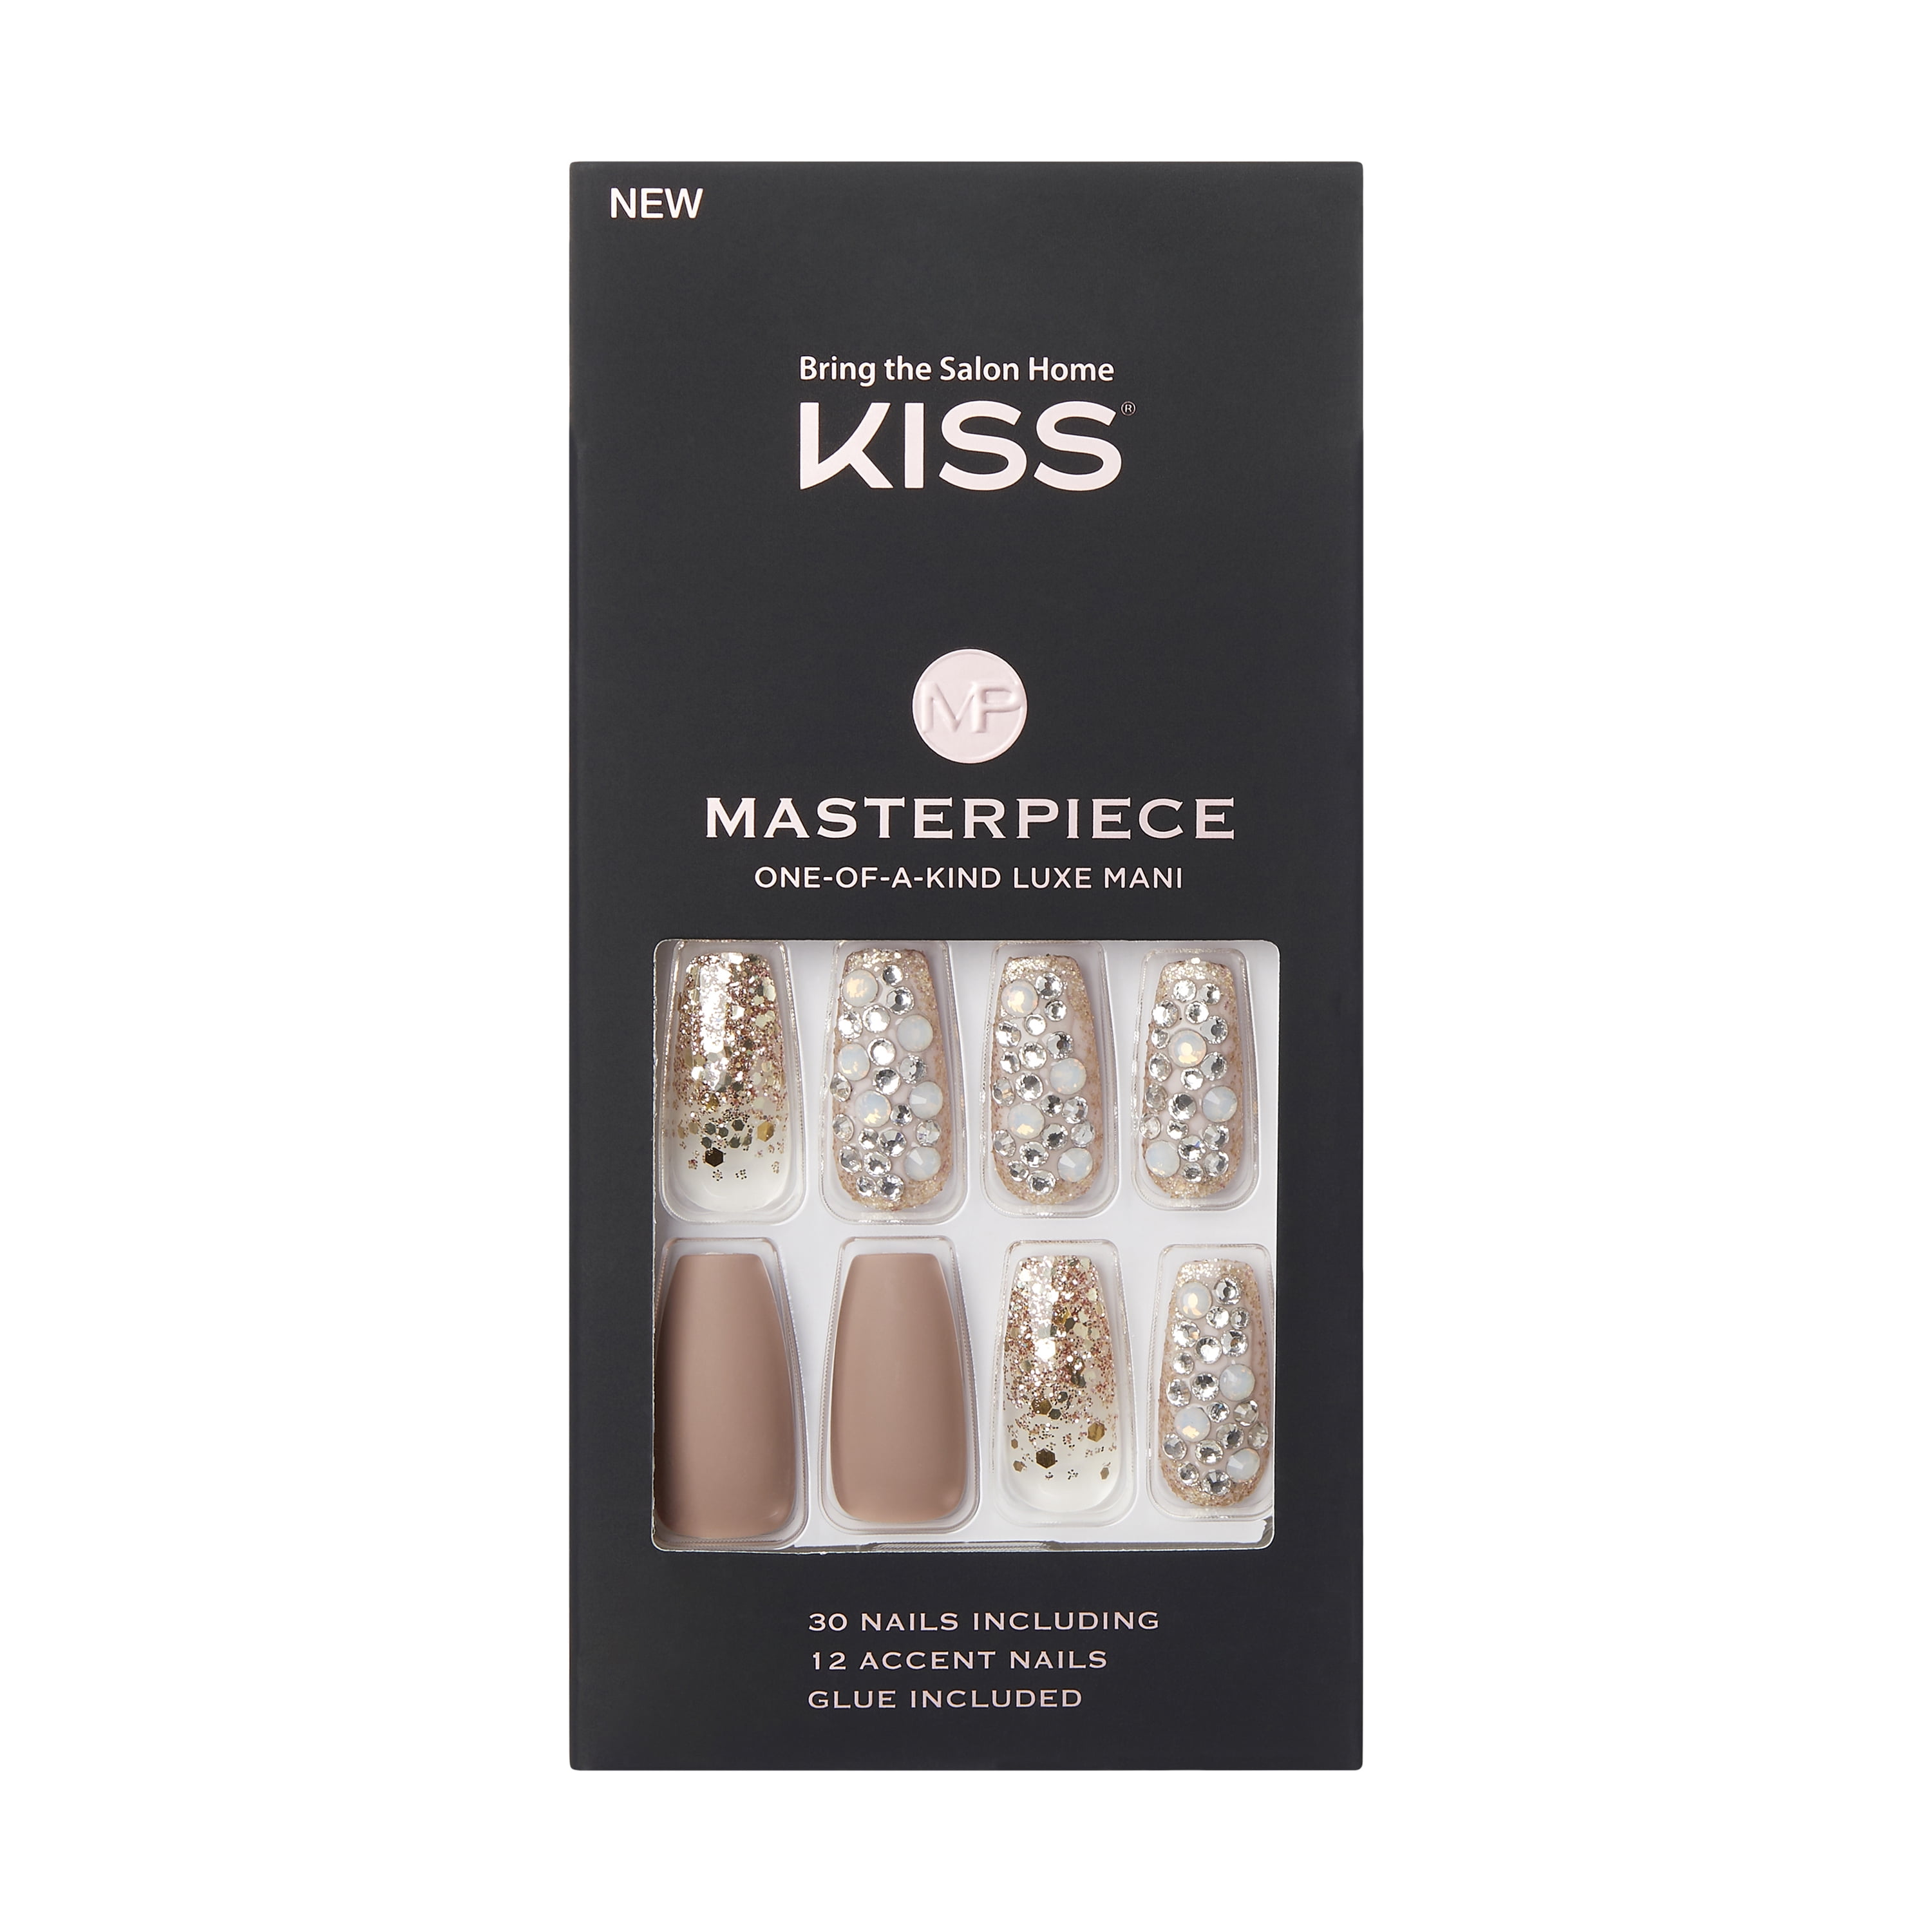 KISS Gel Fantasy Long Coffin Jelly Nails, Pink, 28 pieces - Walmart.com